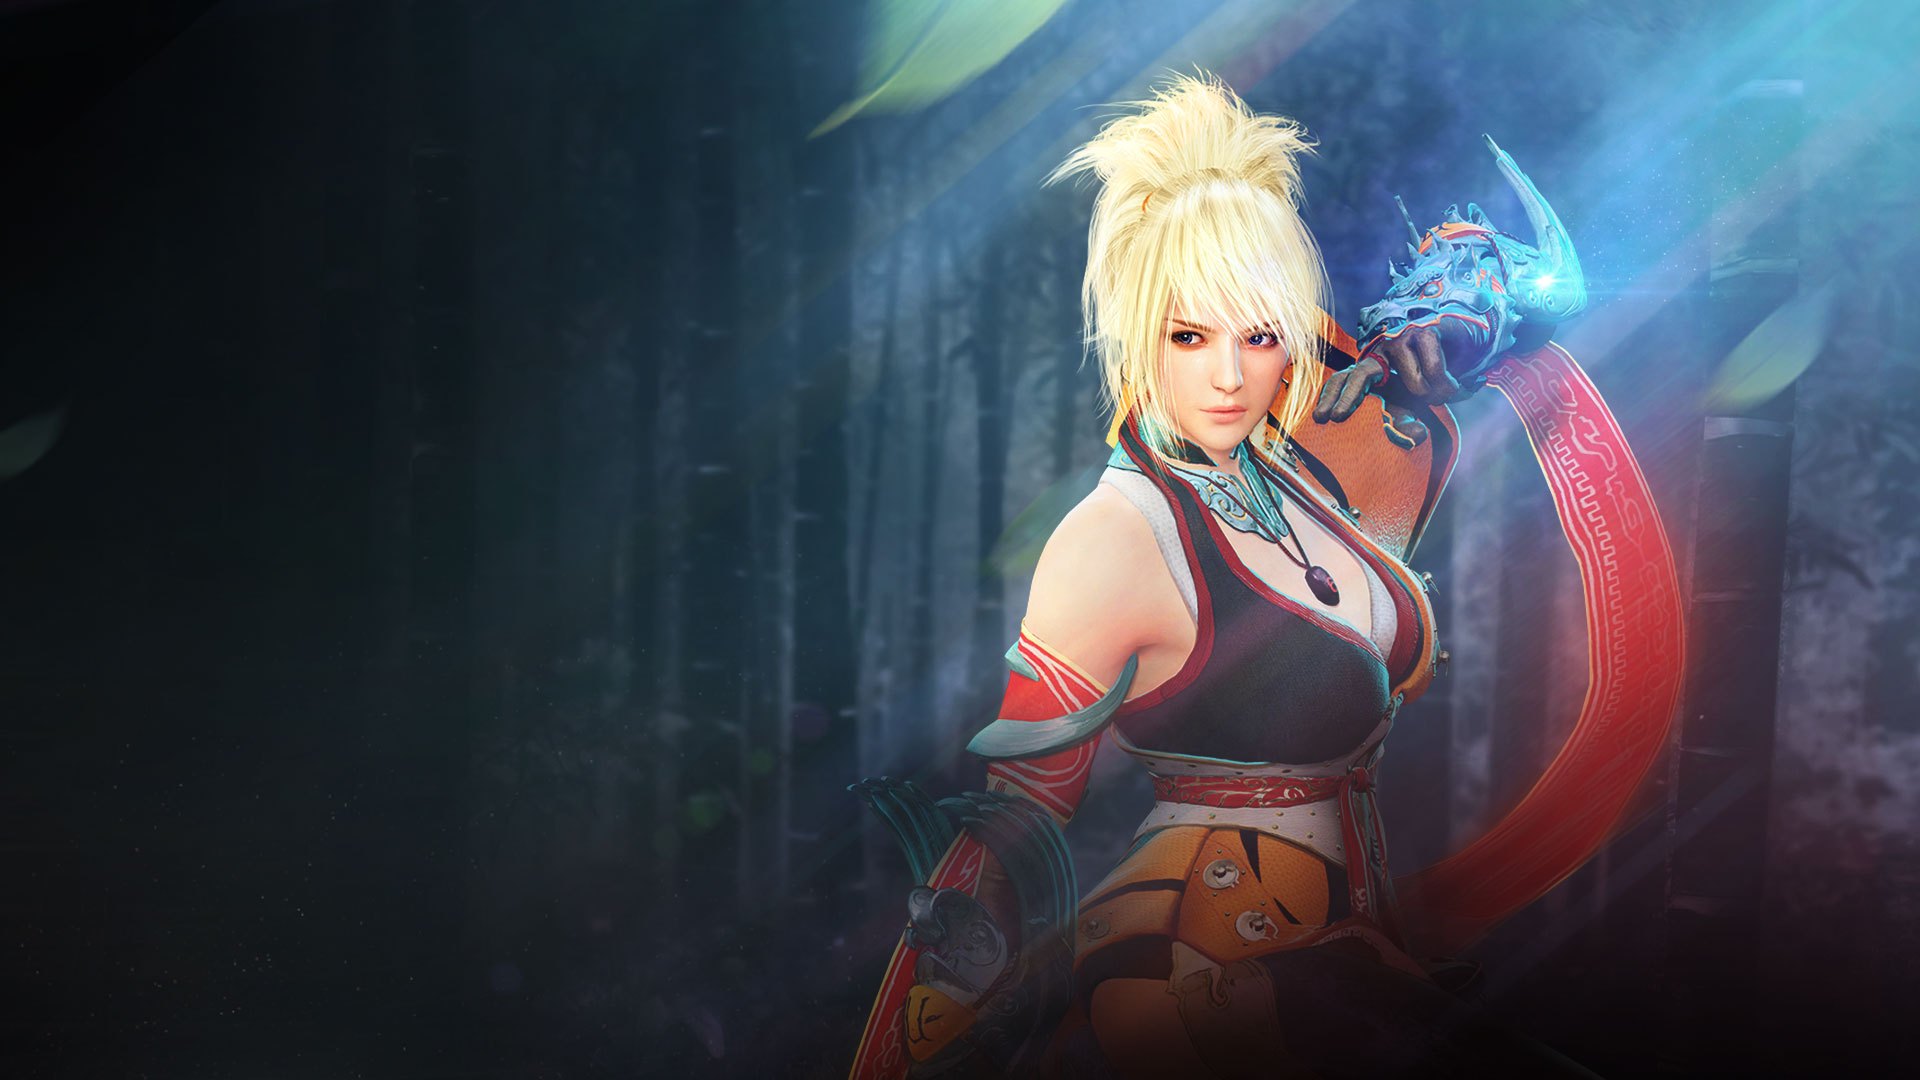 Get Ready to Rumble with Mystic, Now Available in Black Desert on Xbox One